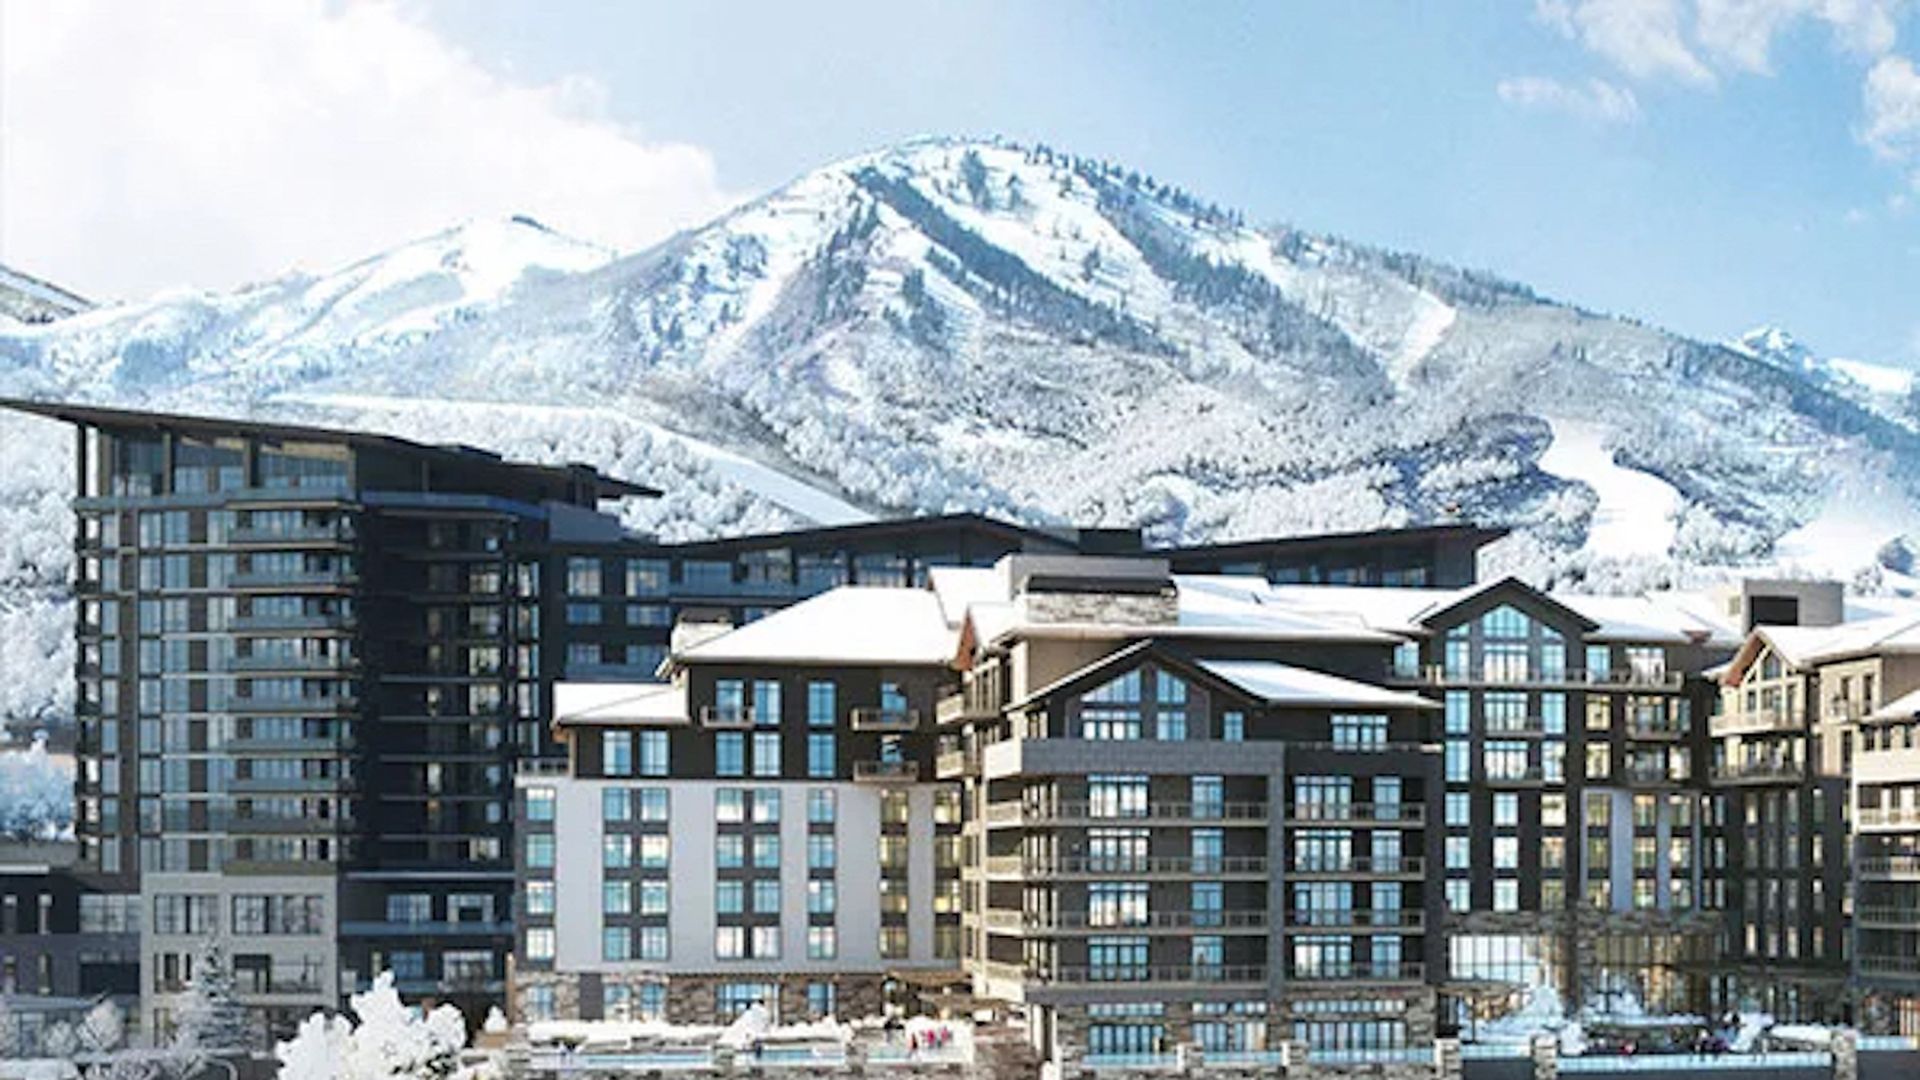 A rendering of hotels in front of a snowy mountain.